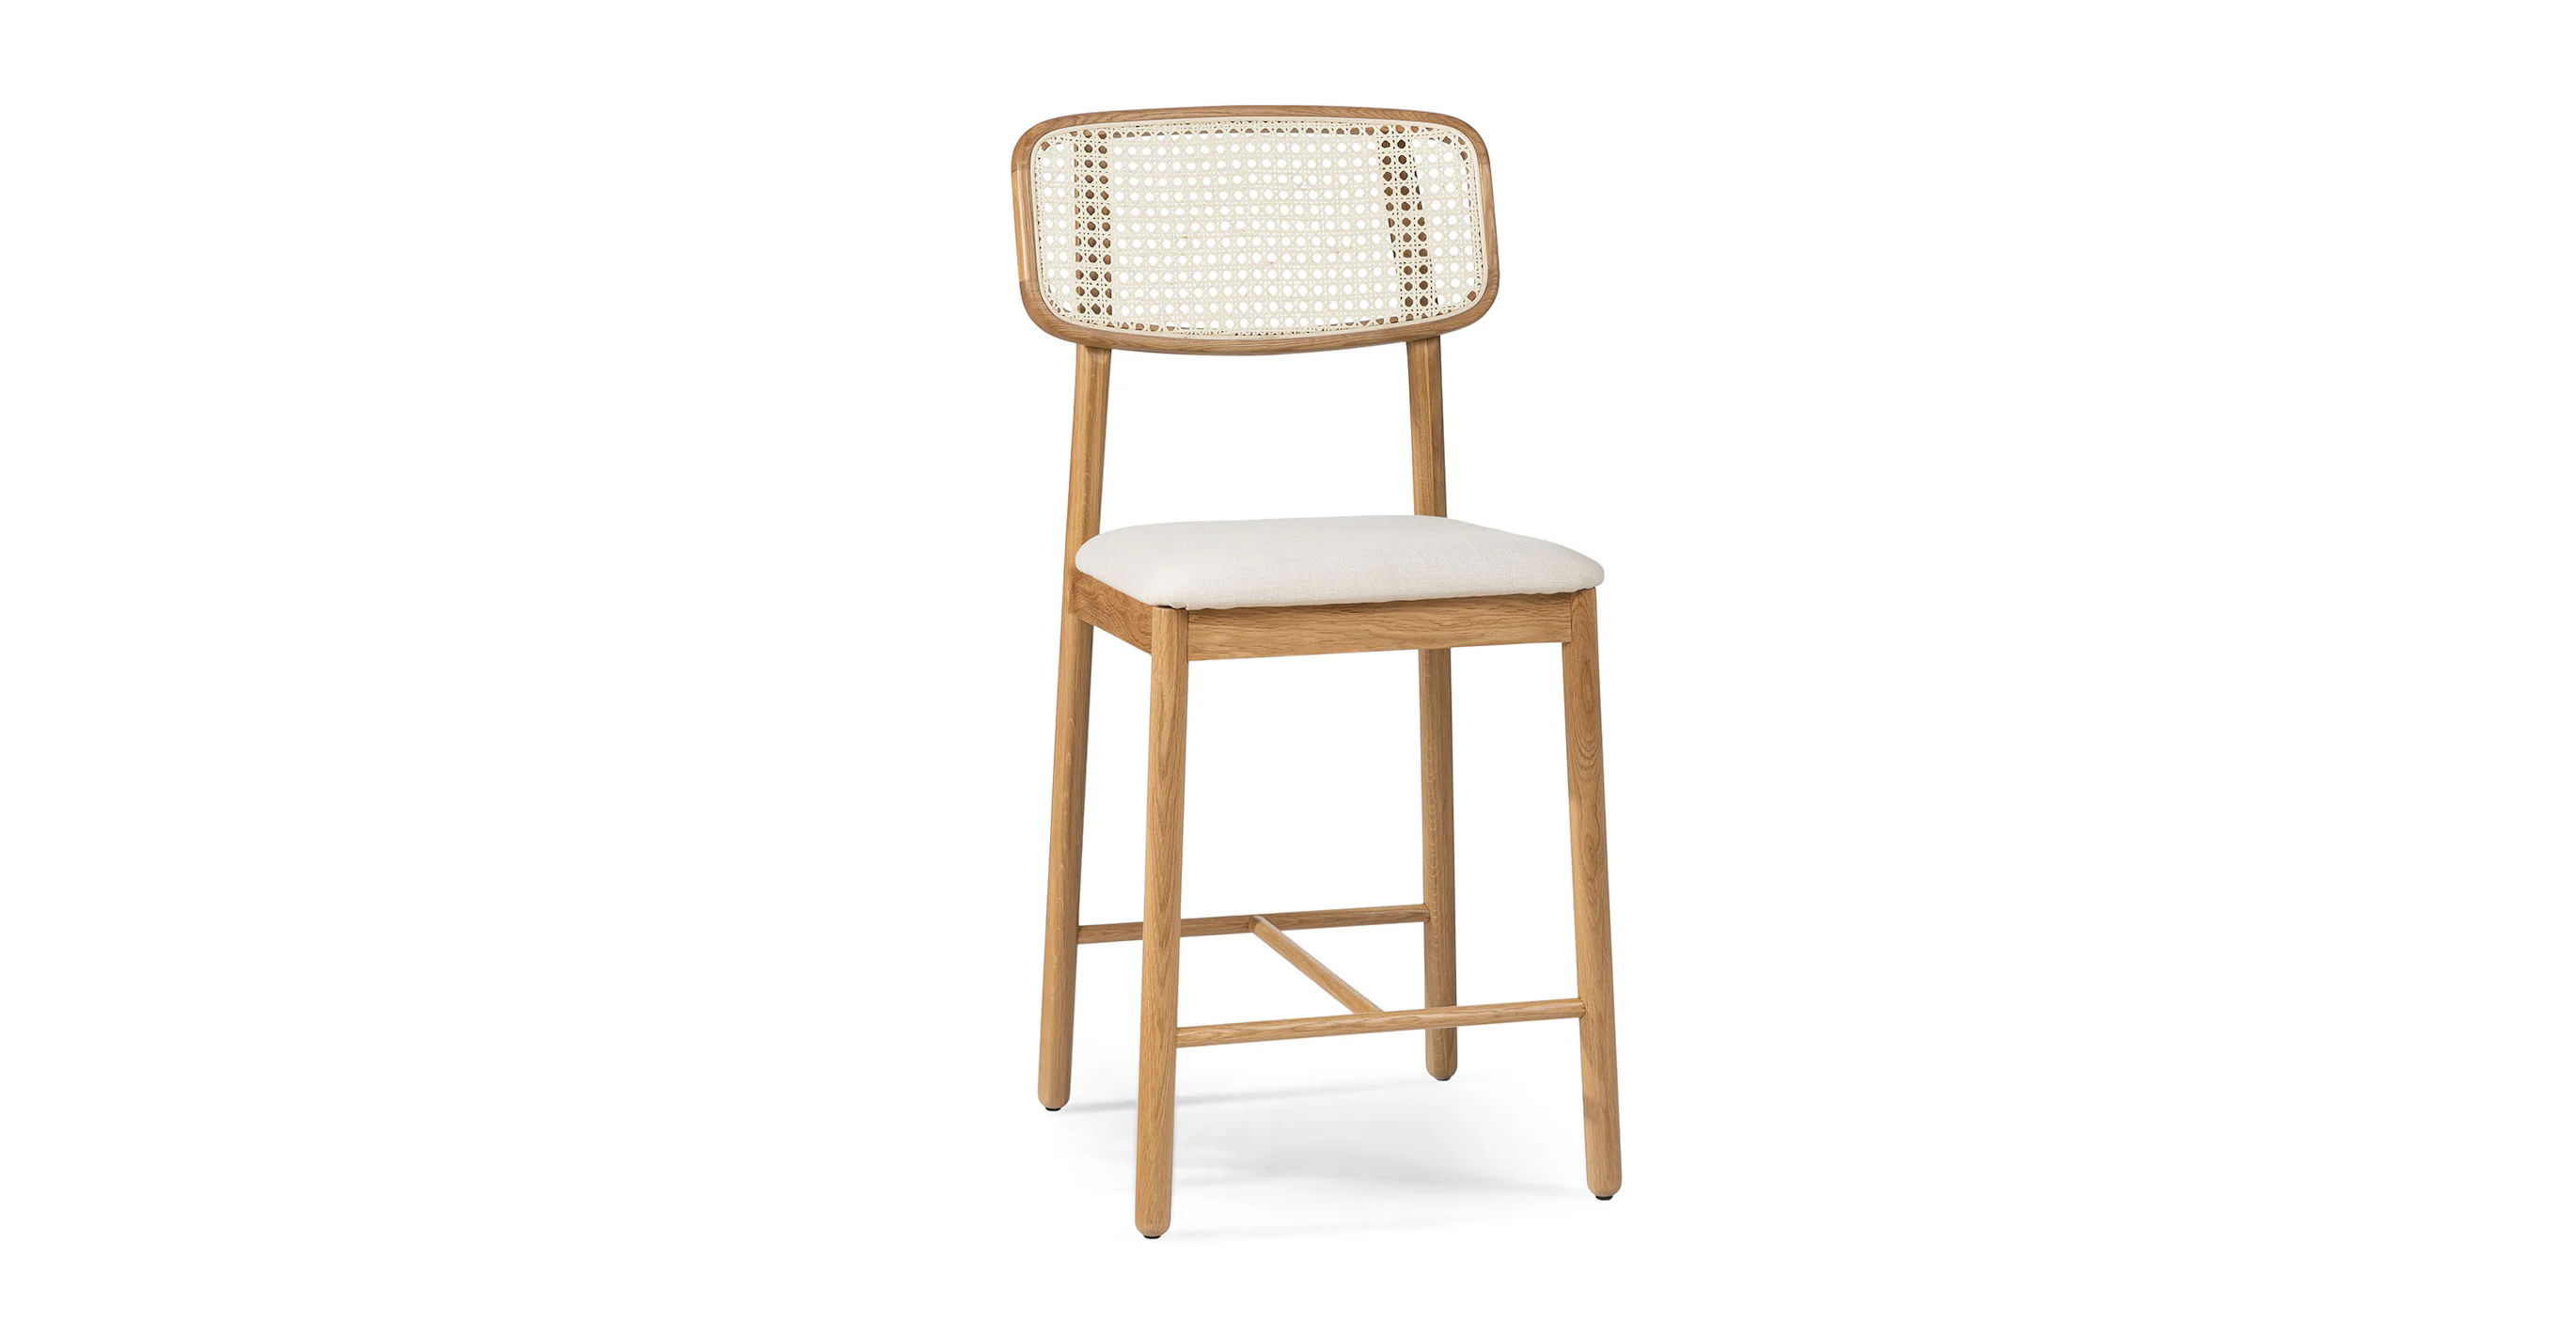 Shop Netro counter stool, vintage white and oak, Qty: 4 from Article on Openhaus